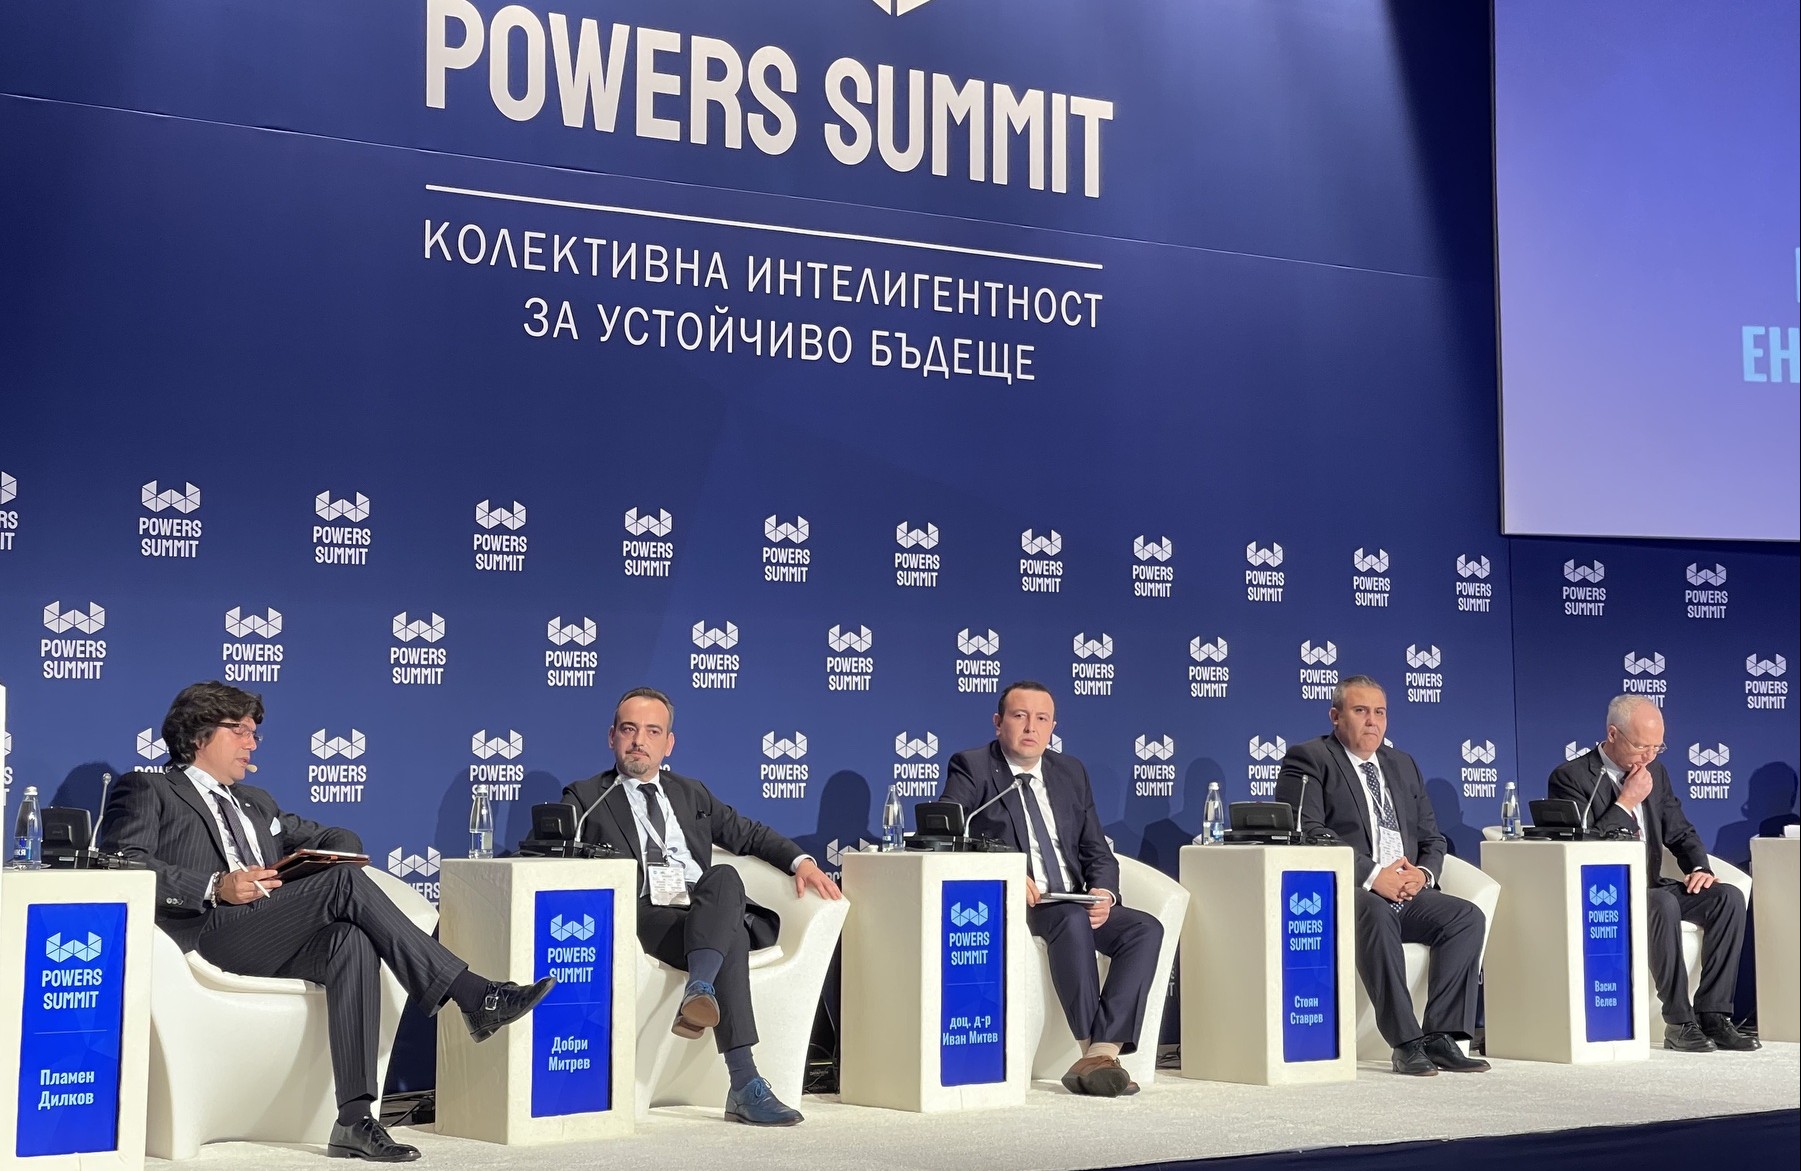 Dobri Mitrev: Green transition, decarbonization and digital transition must be in the top priorities of the state